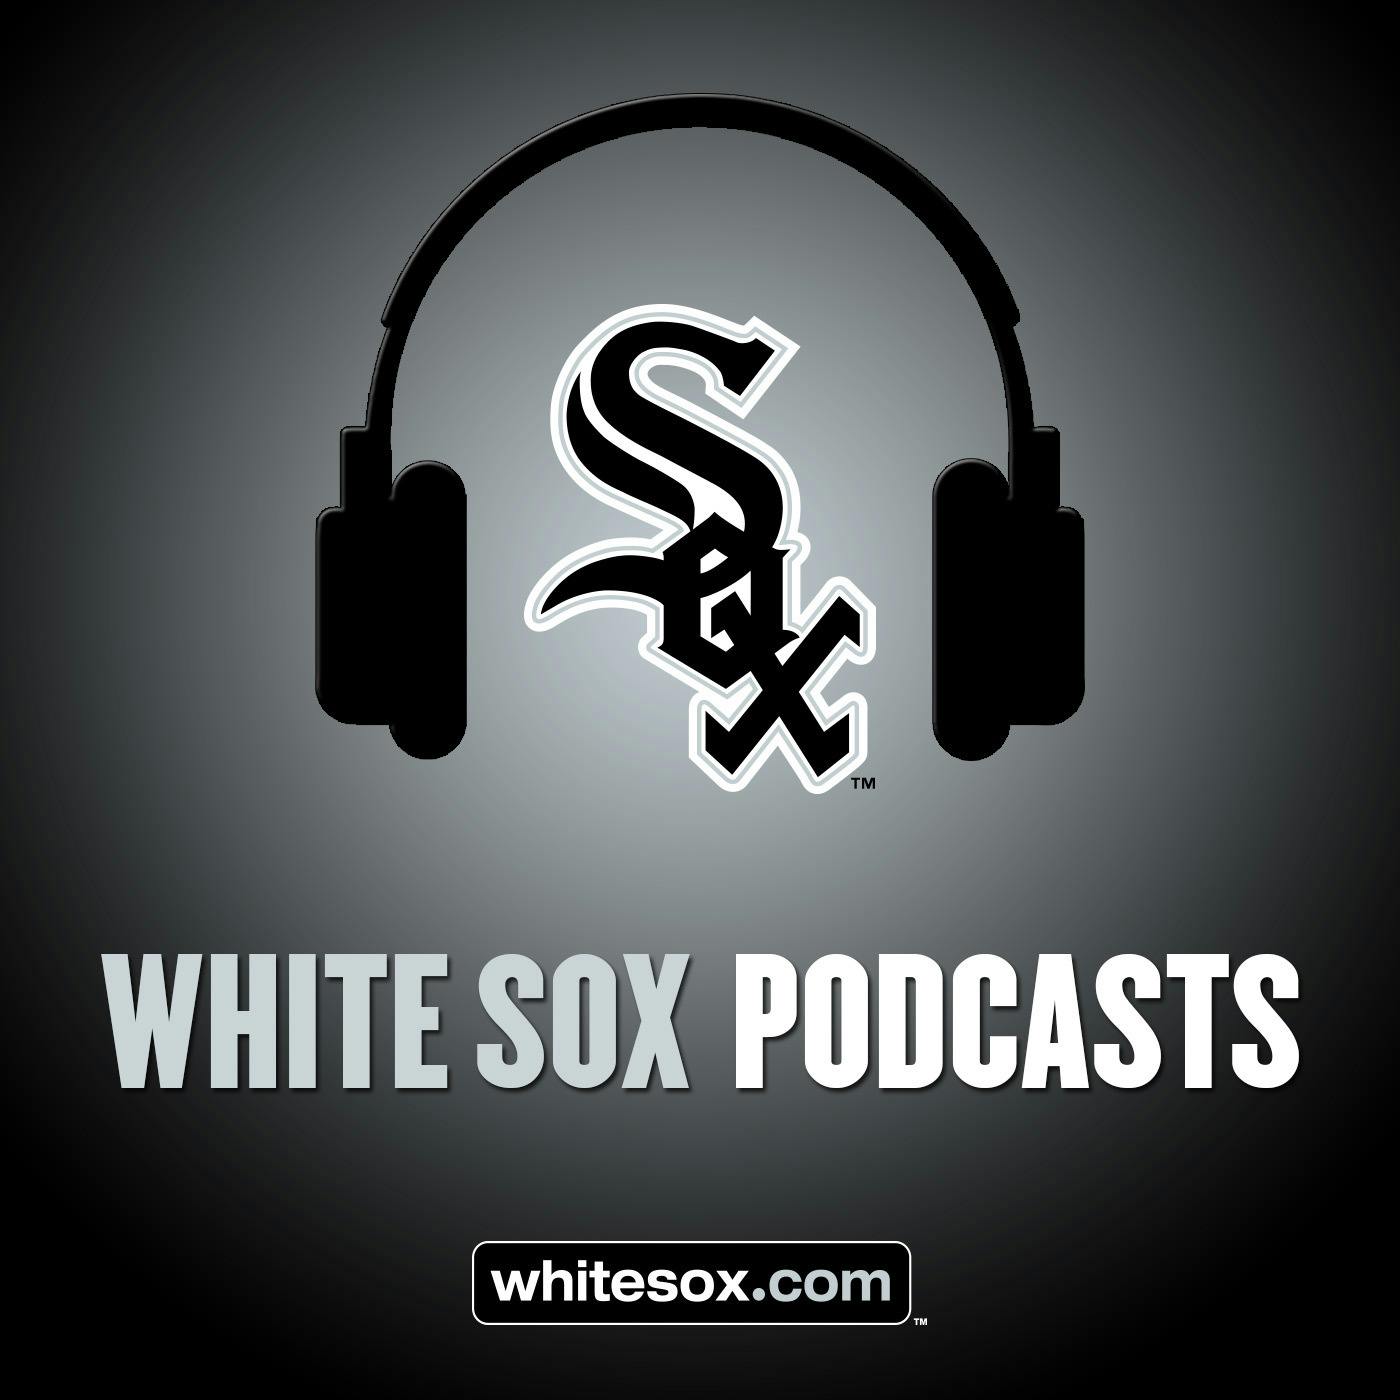 12/22/18: White Sox Weekly